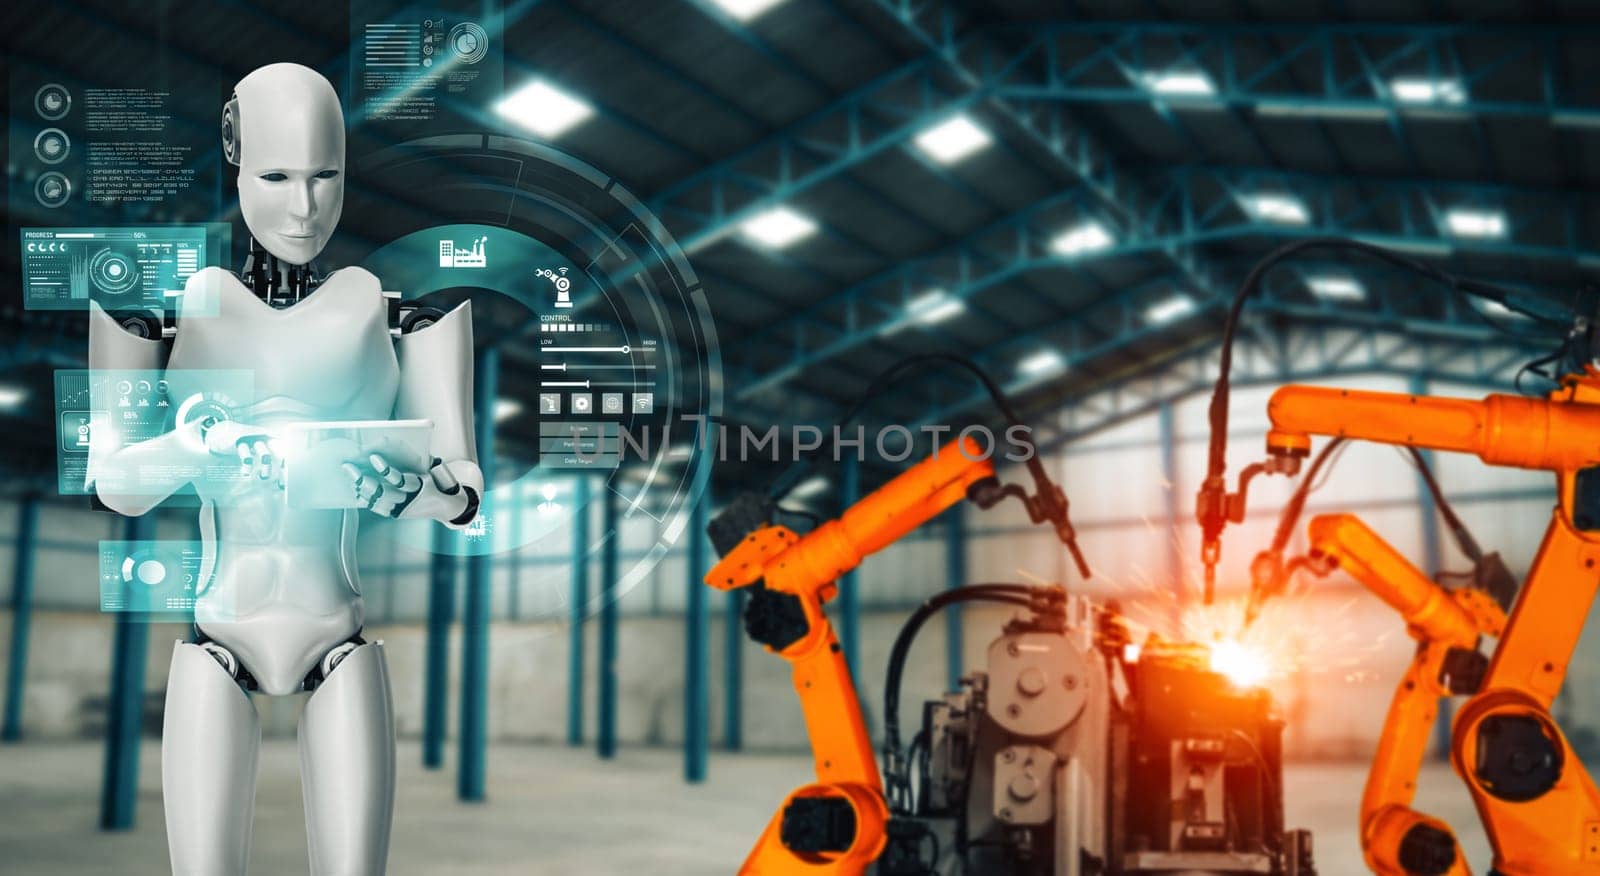 XAI Mechanized industry robot and robotic arms for assembly in factory production. Concept of artificial intelligence for industrial revolution and automation manufacturing process.